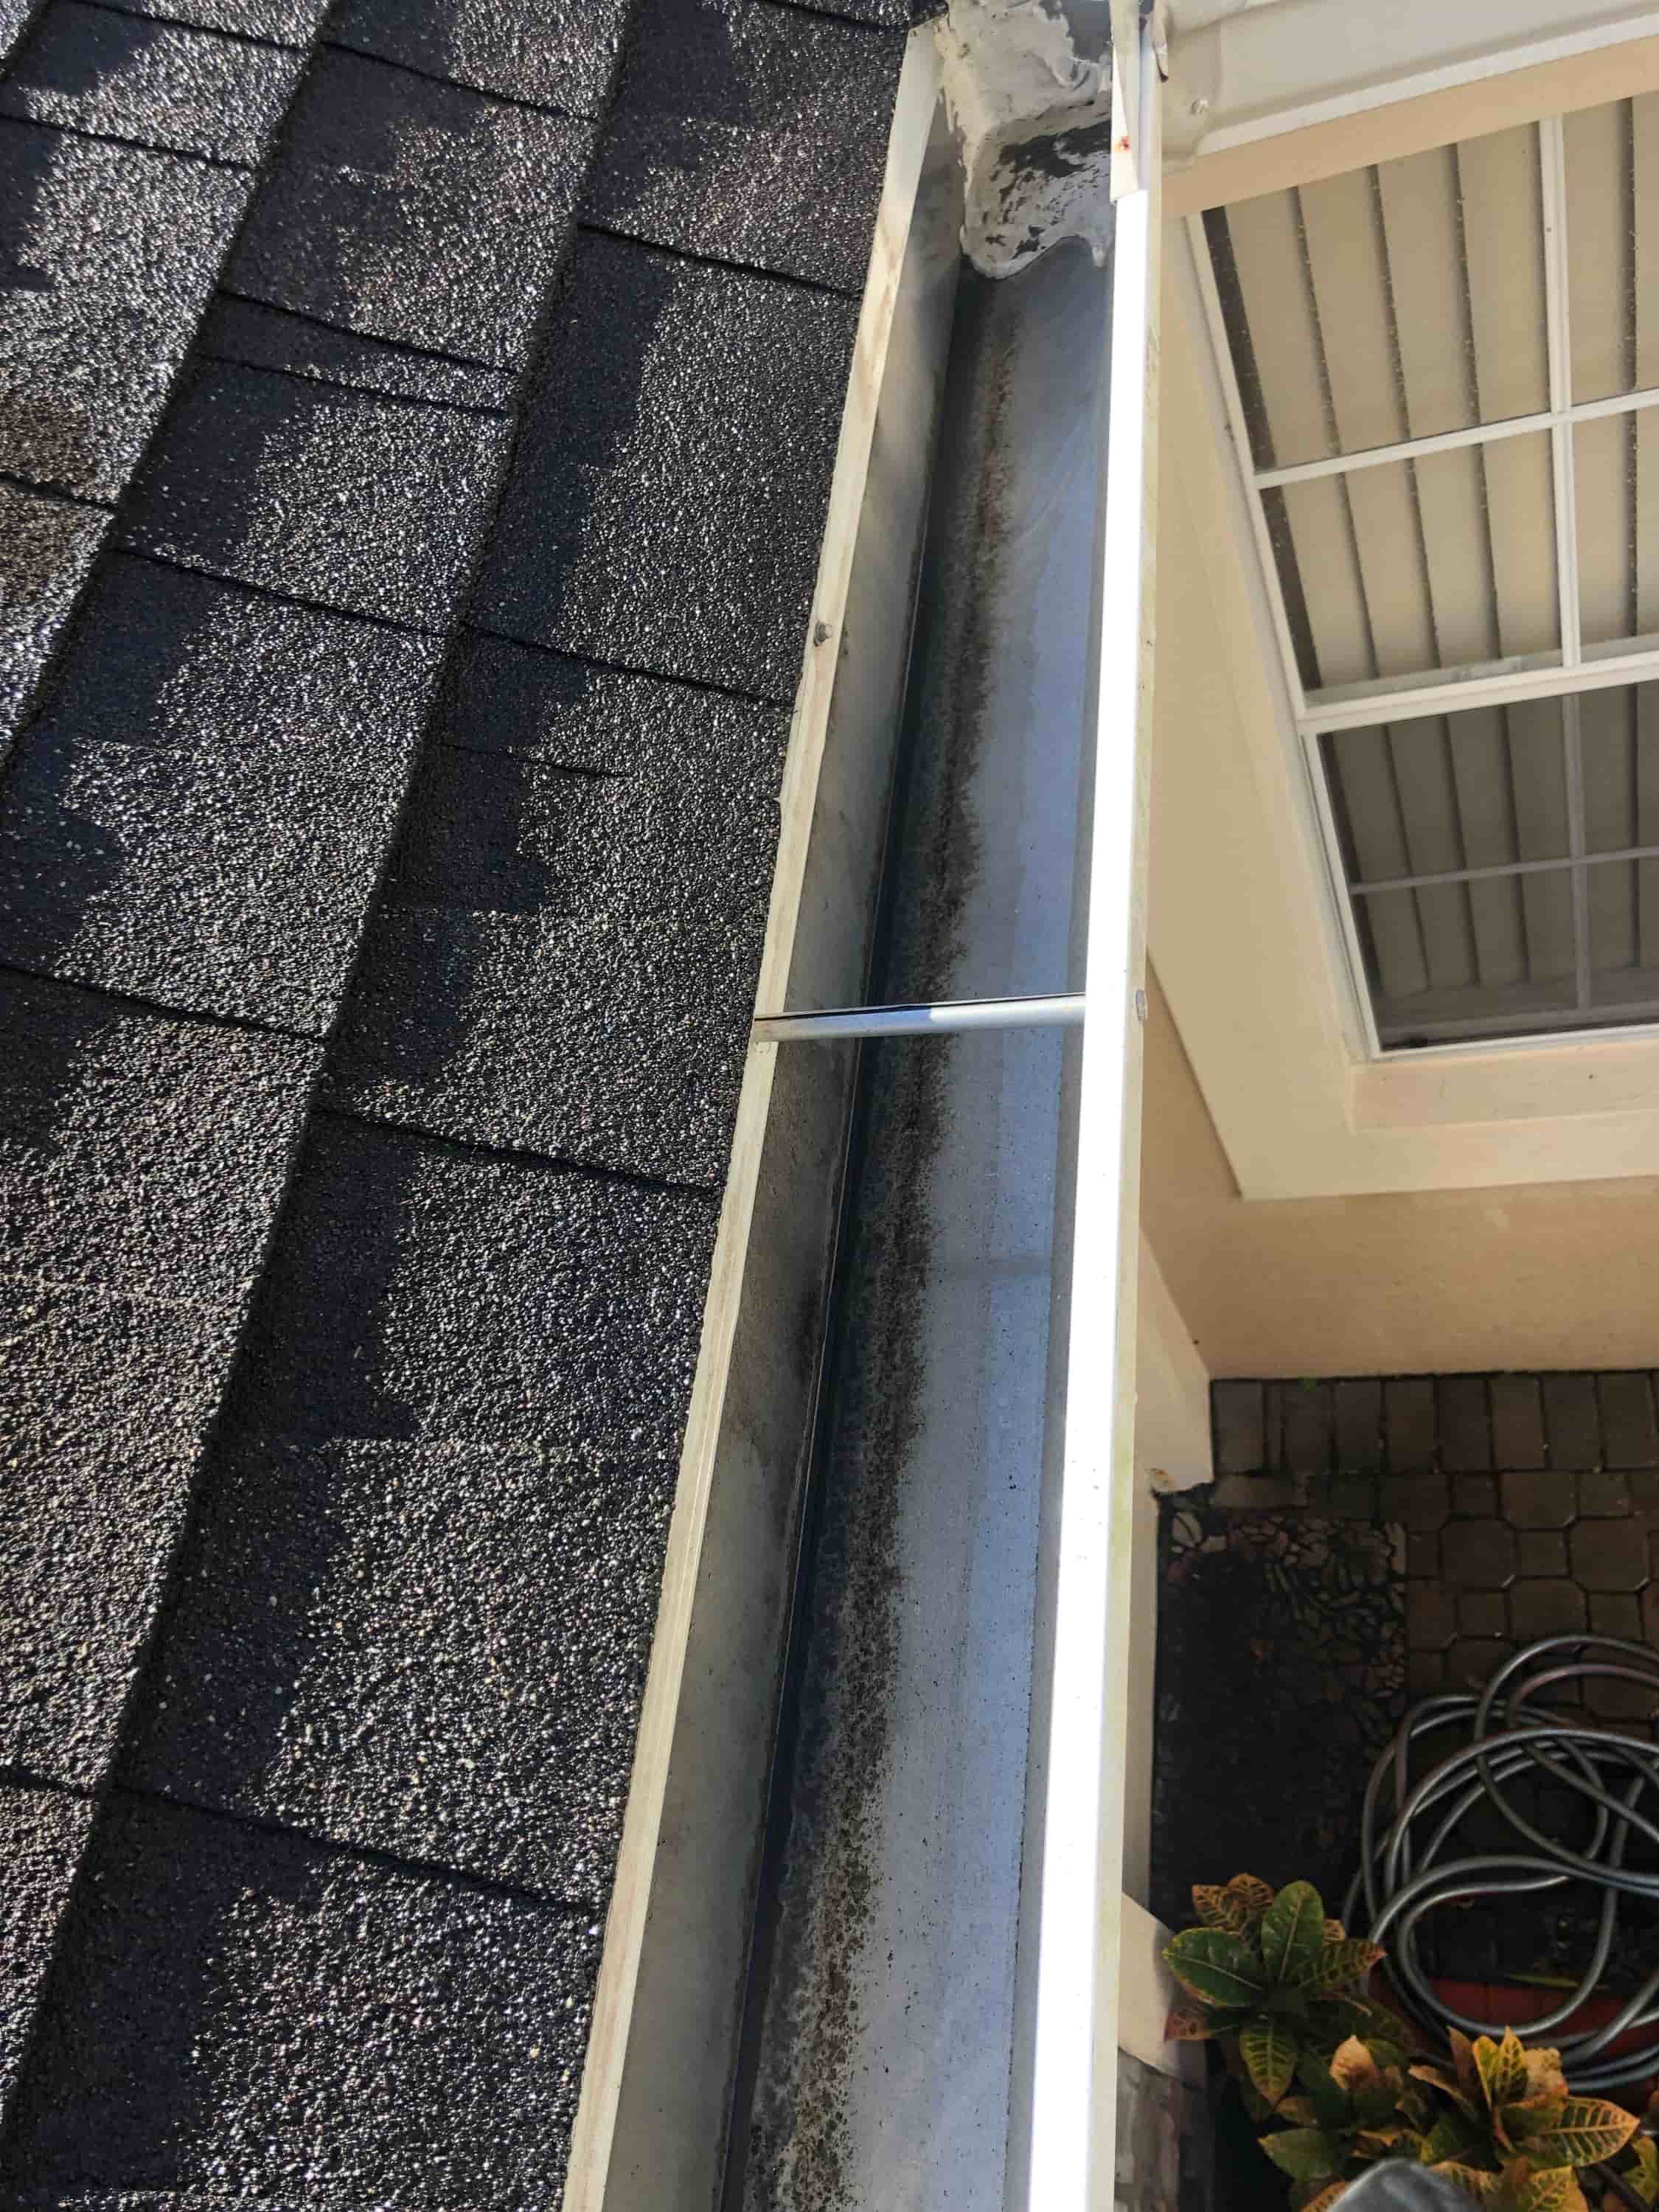 cleaning out gutter drains